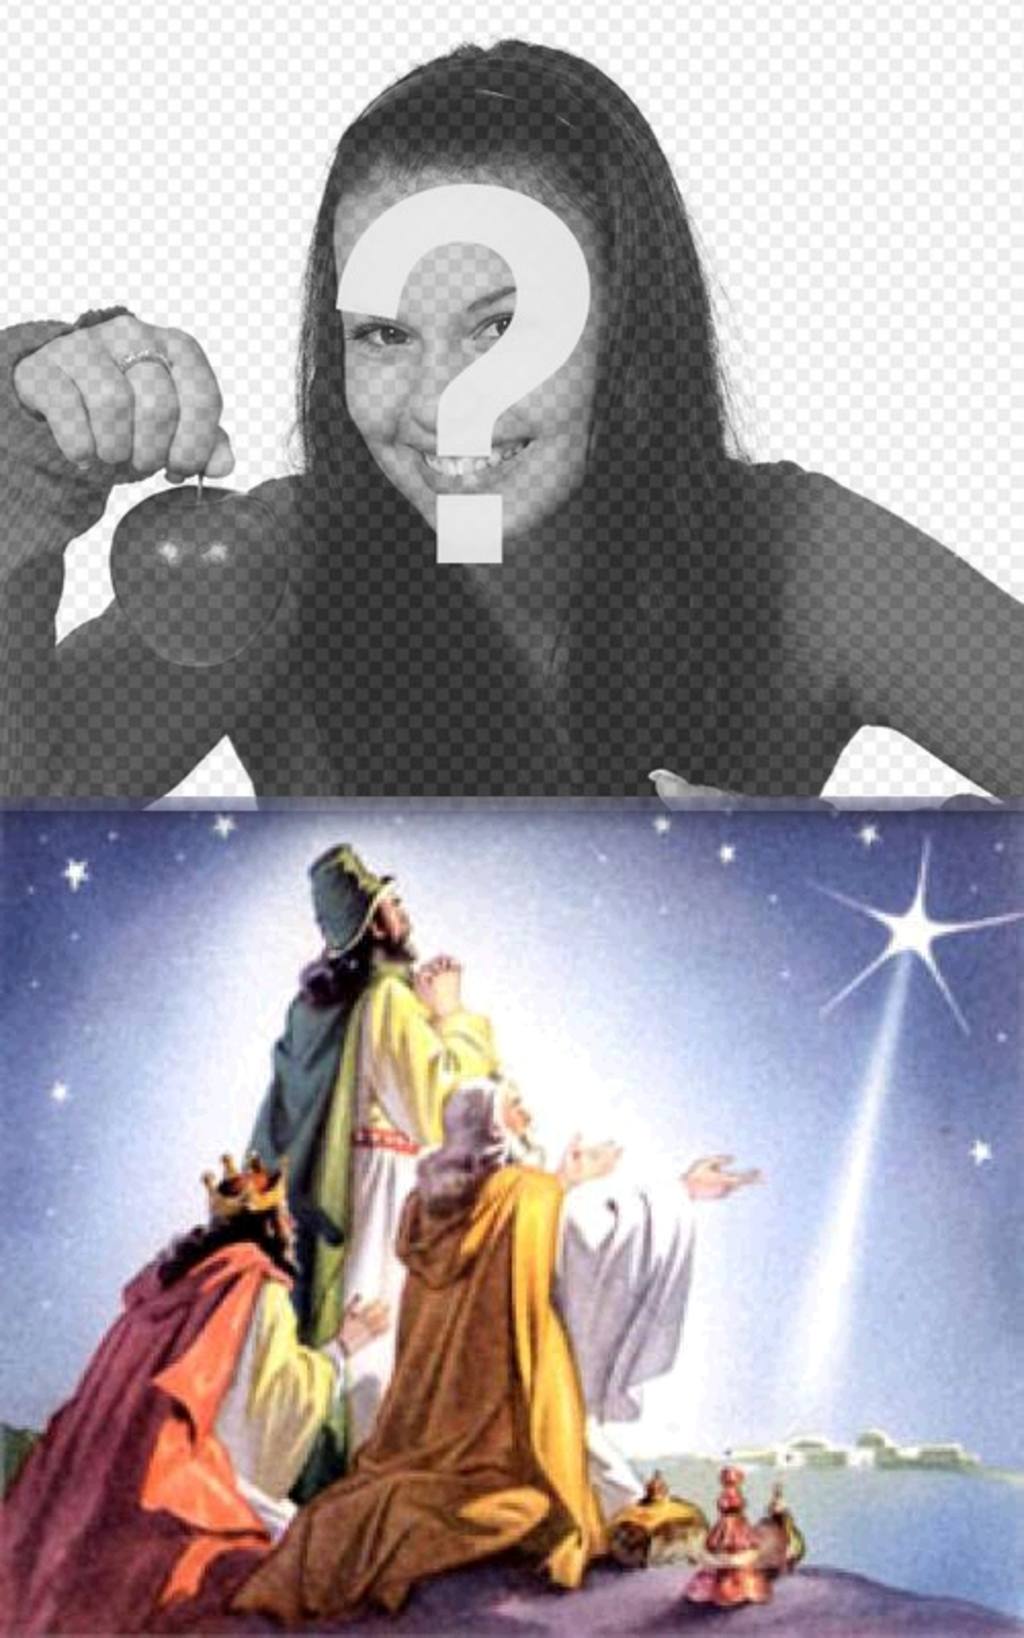 Christmas Card of the three wise men from the East with their offerings coming to Bethlehem, following the star that marked the child Jesús.Podemos put a picture of our choice. Congratulates the holidays with..